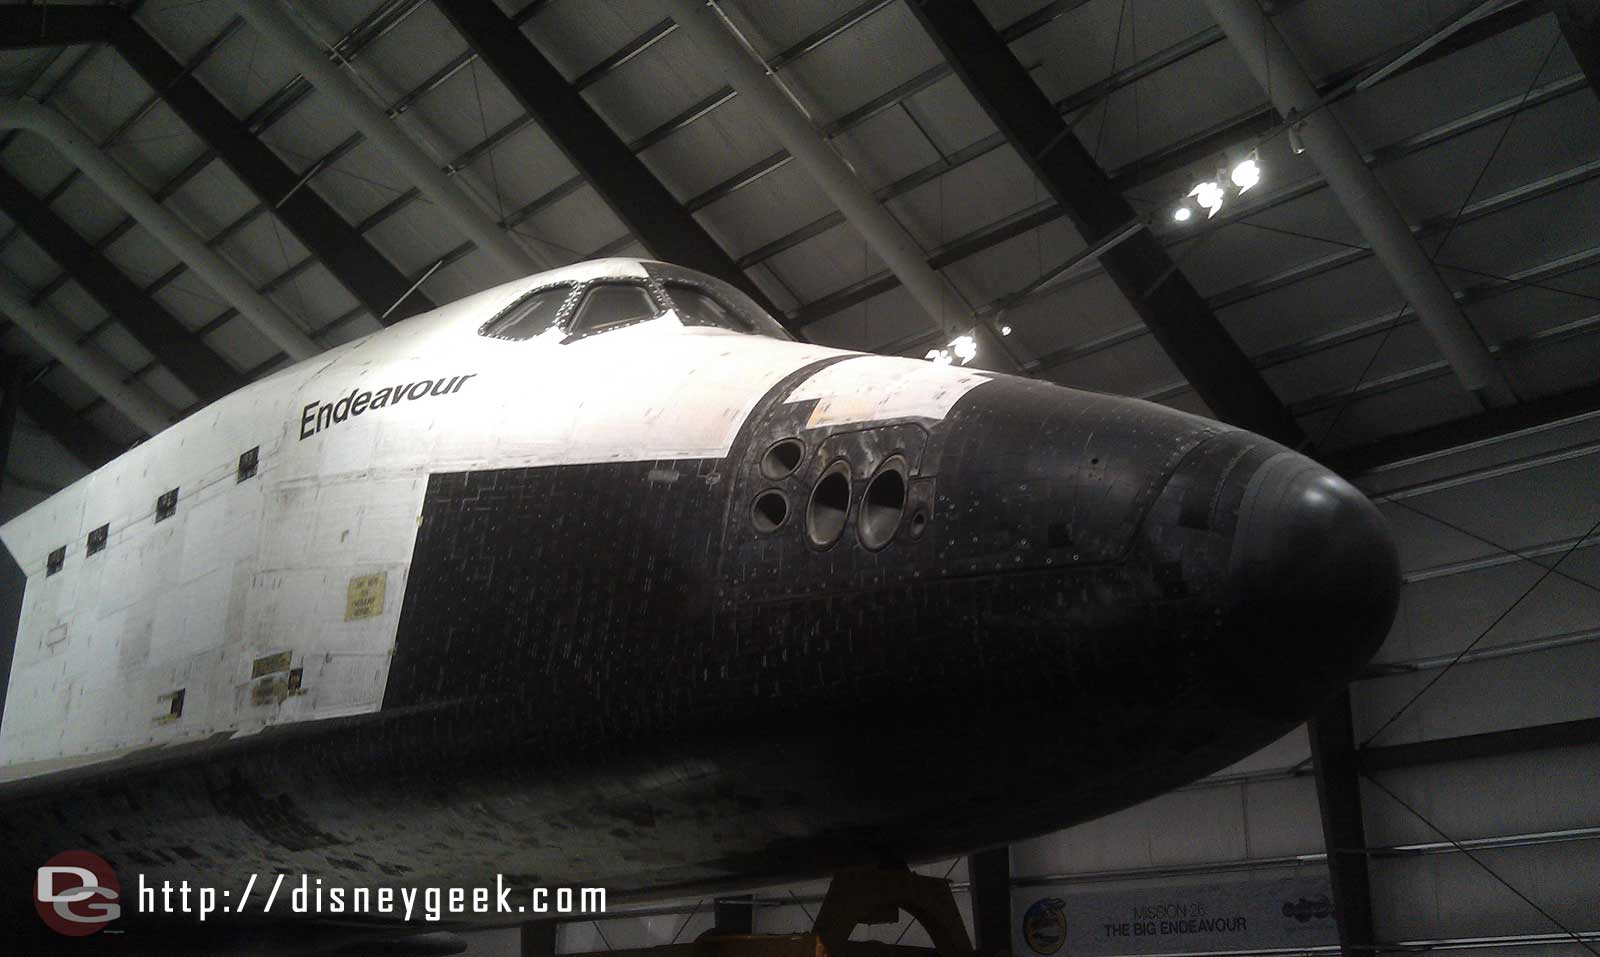 To close with the nose of Endeavour